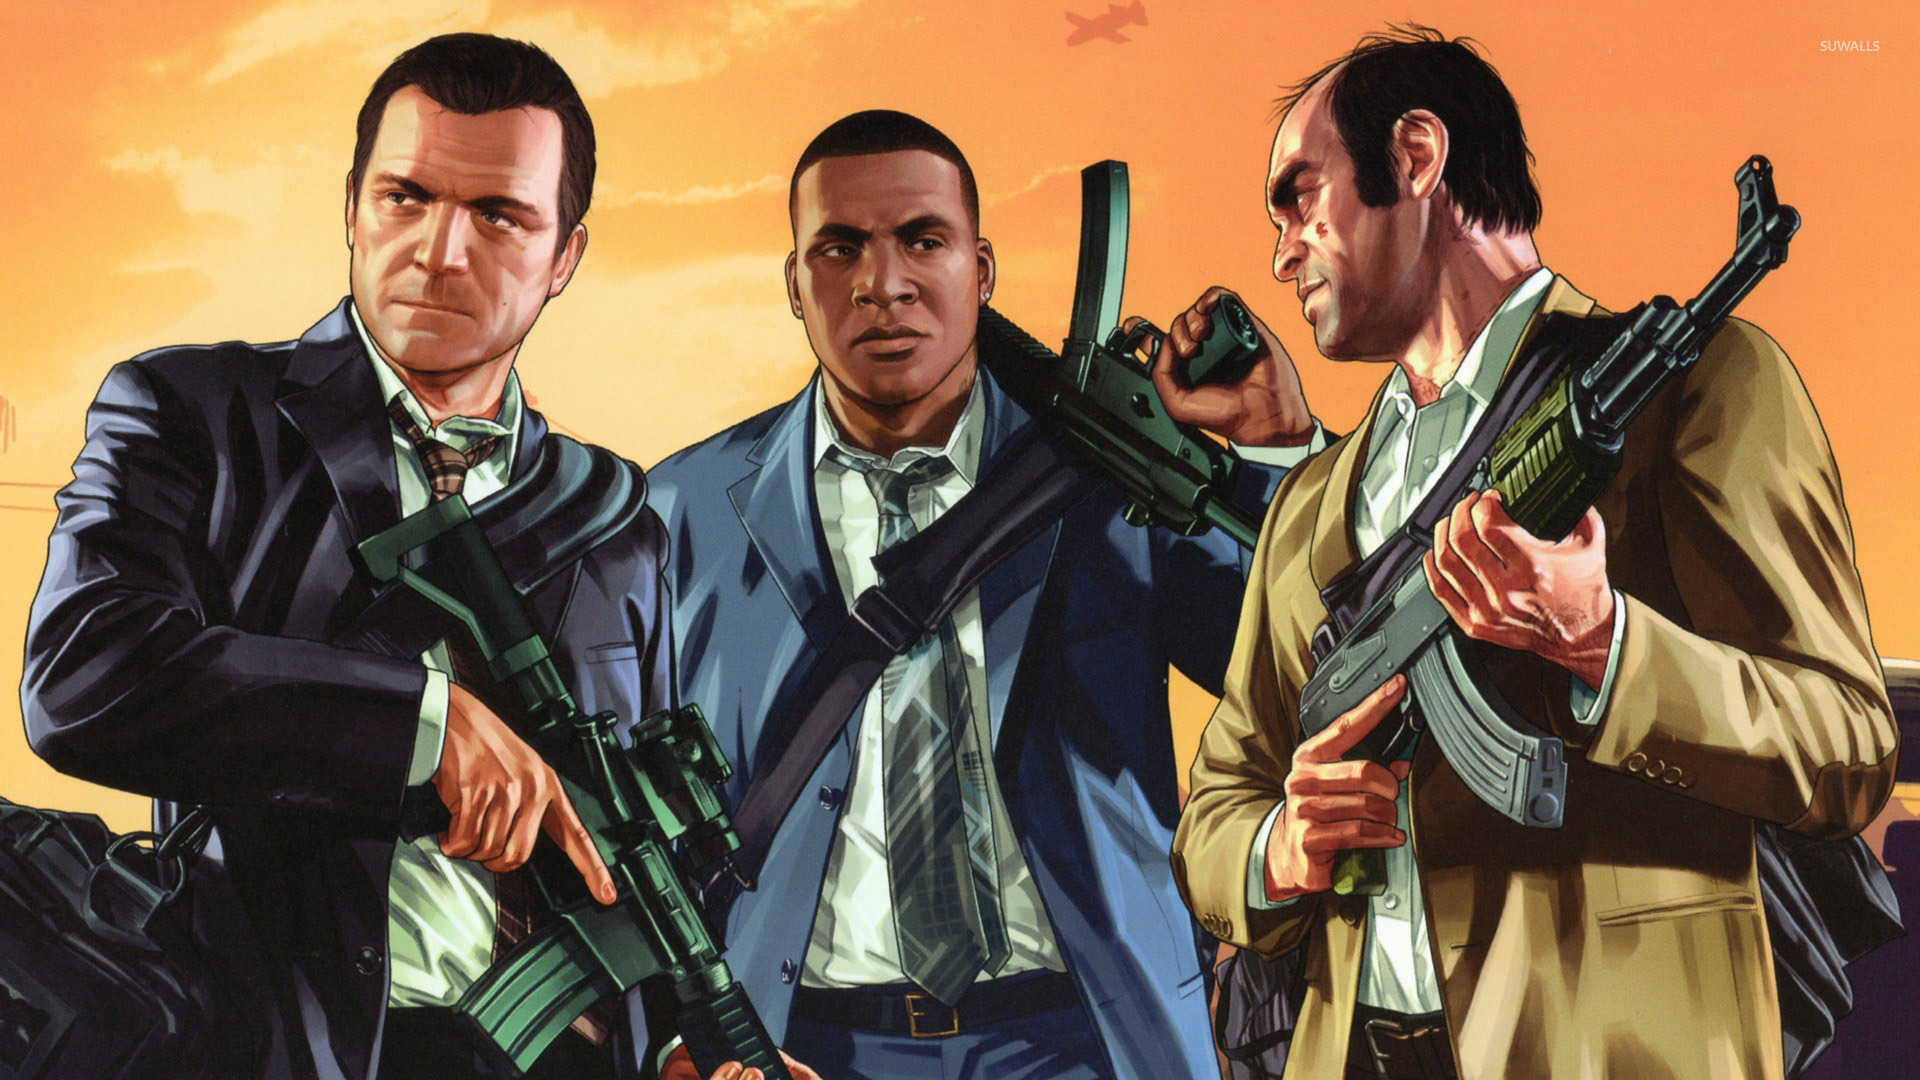 Grand Theft Auto V 10 Wallpaper Game Wallpapers 31035 Images, Photos, Reviews